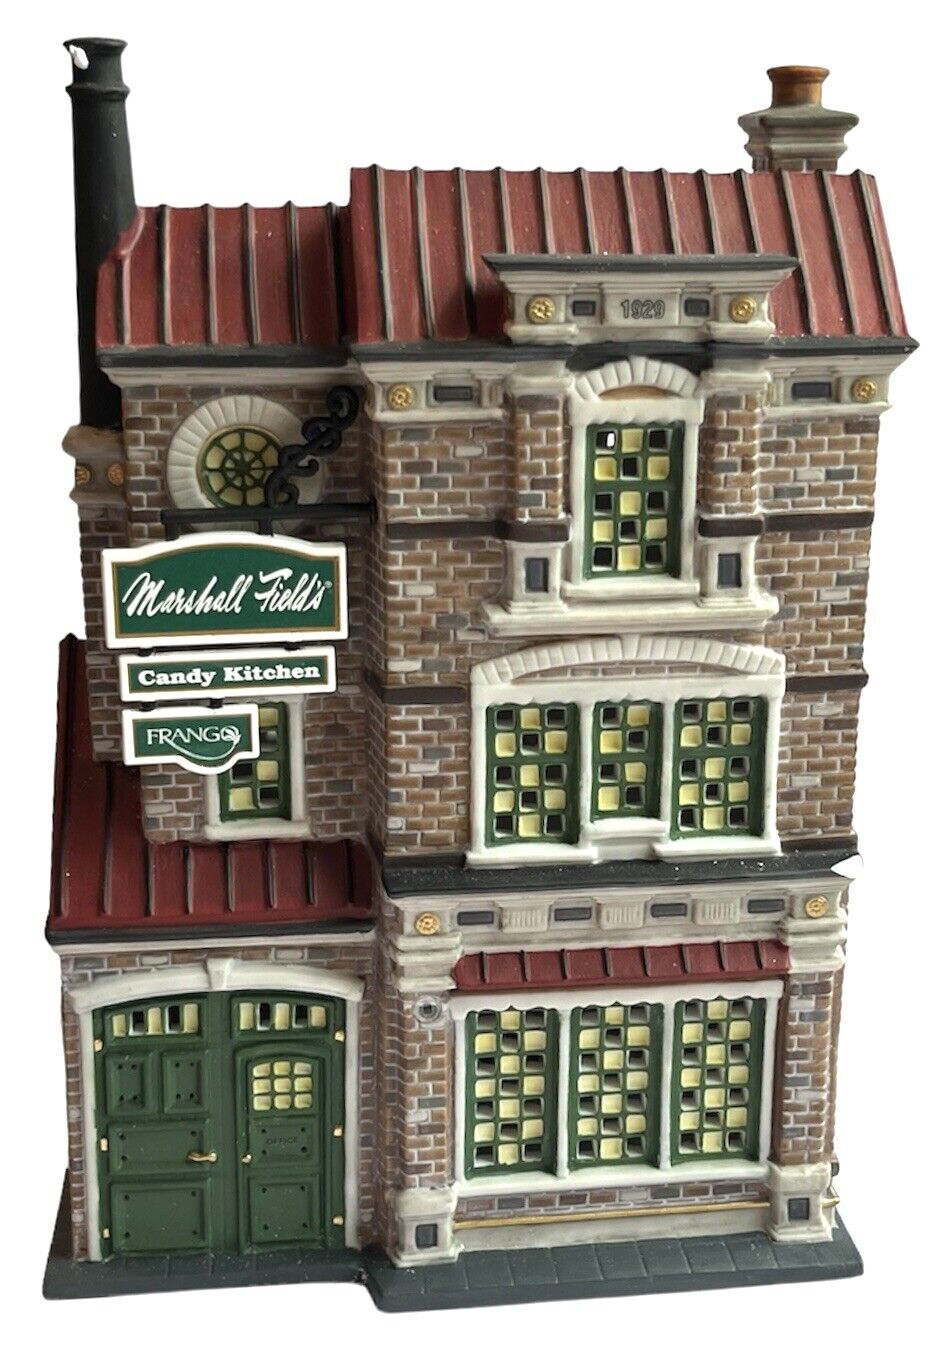 Dept 56 Marshall Field's Frango Factory Candy Kitchen, Department 56 Chicago